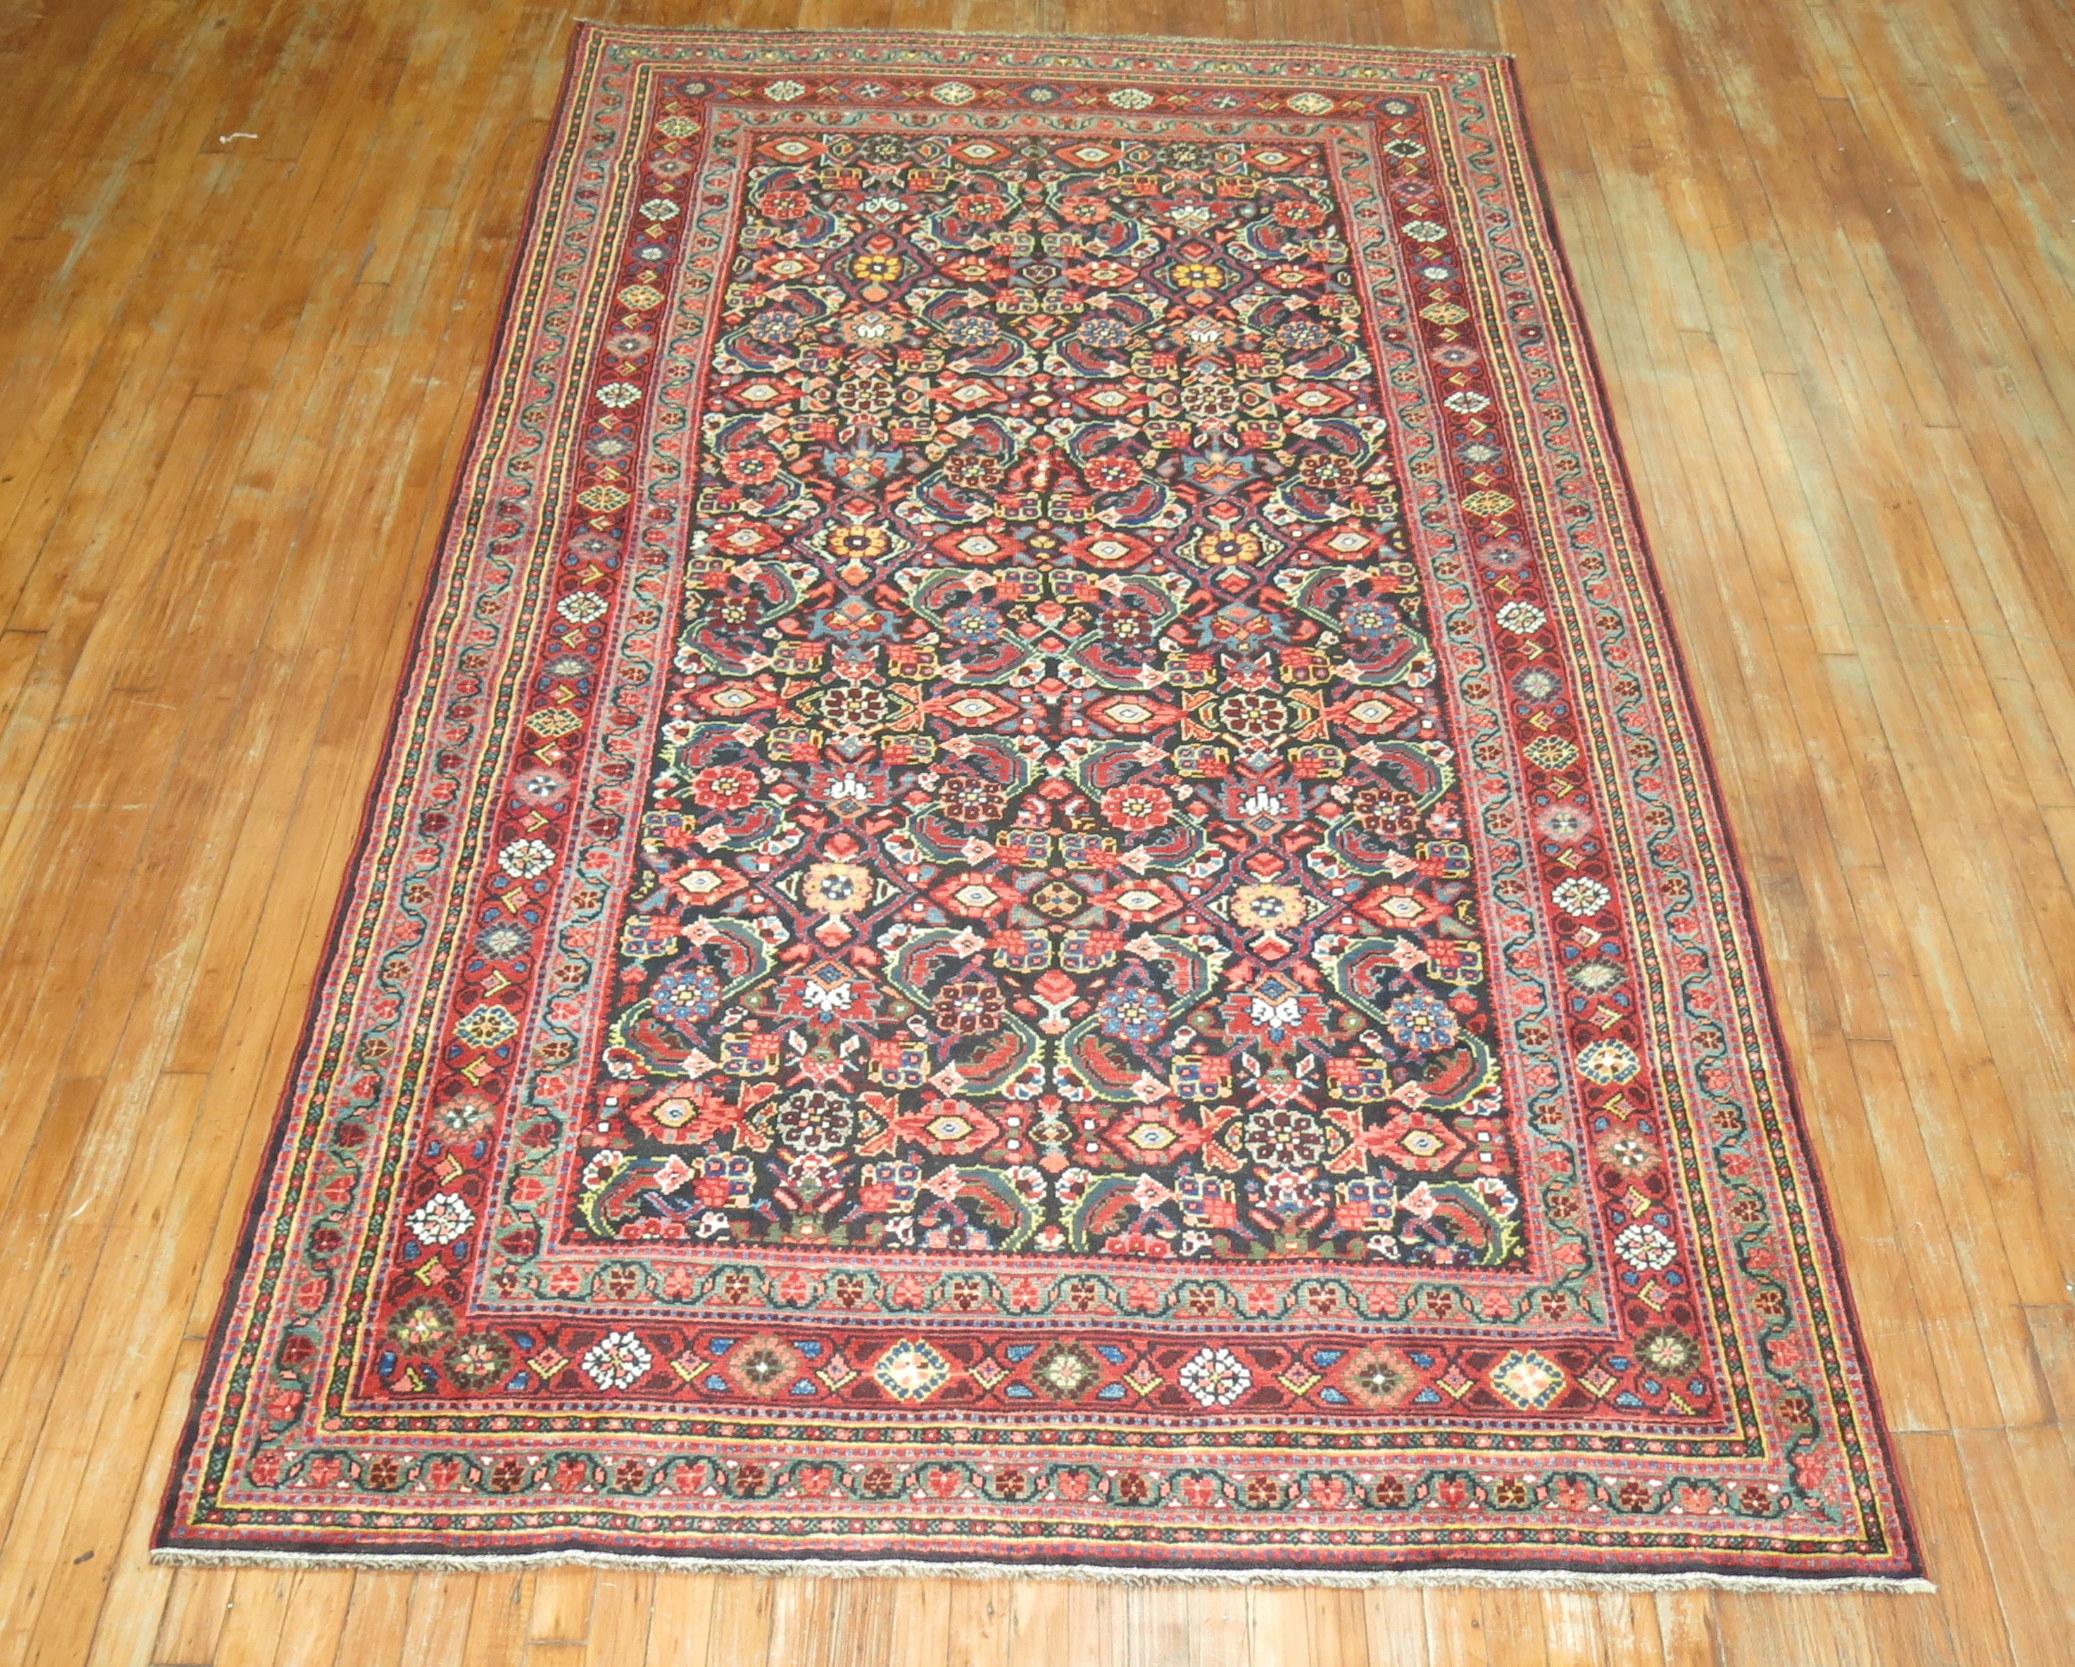 Classic Persian Ferehan featuring a navy blue background and Herati design.

5'9'' x 9'11'